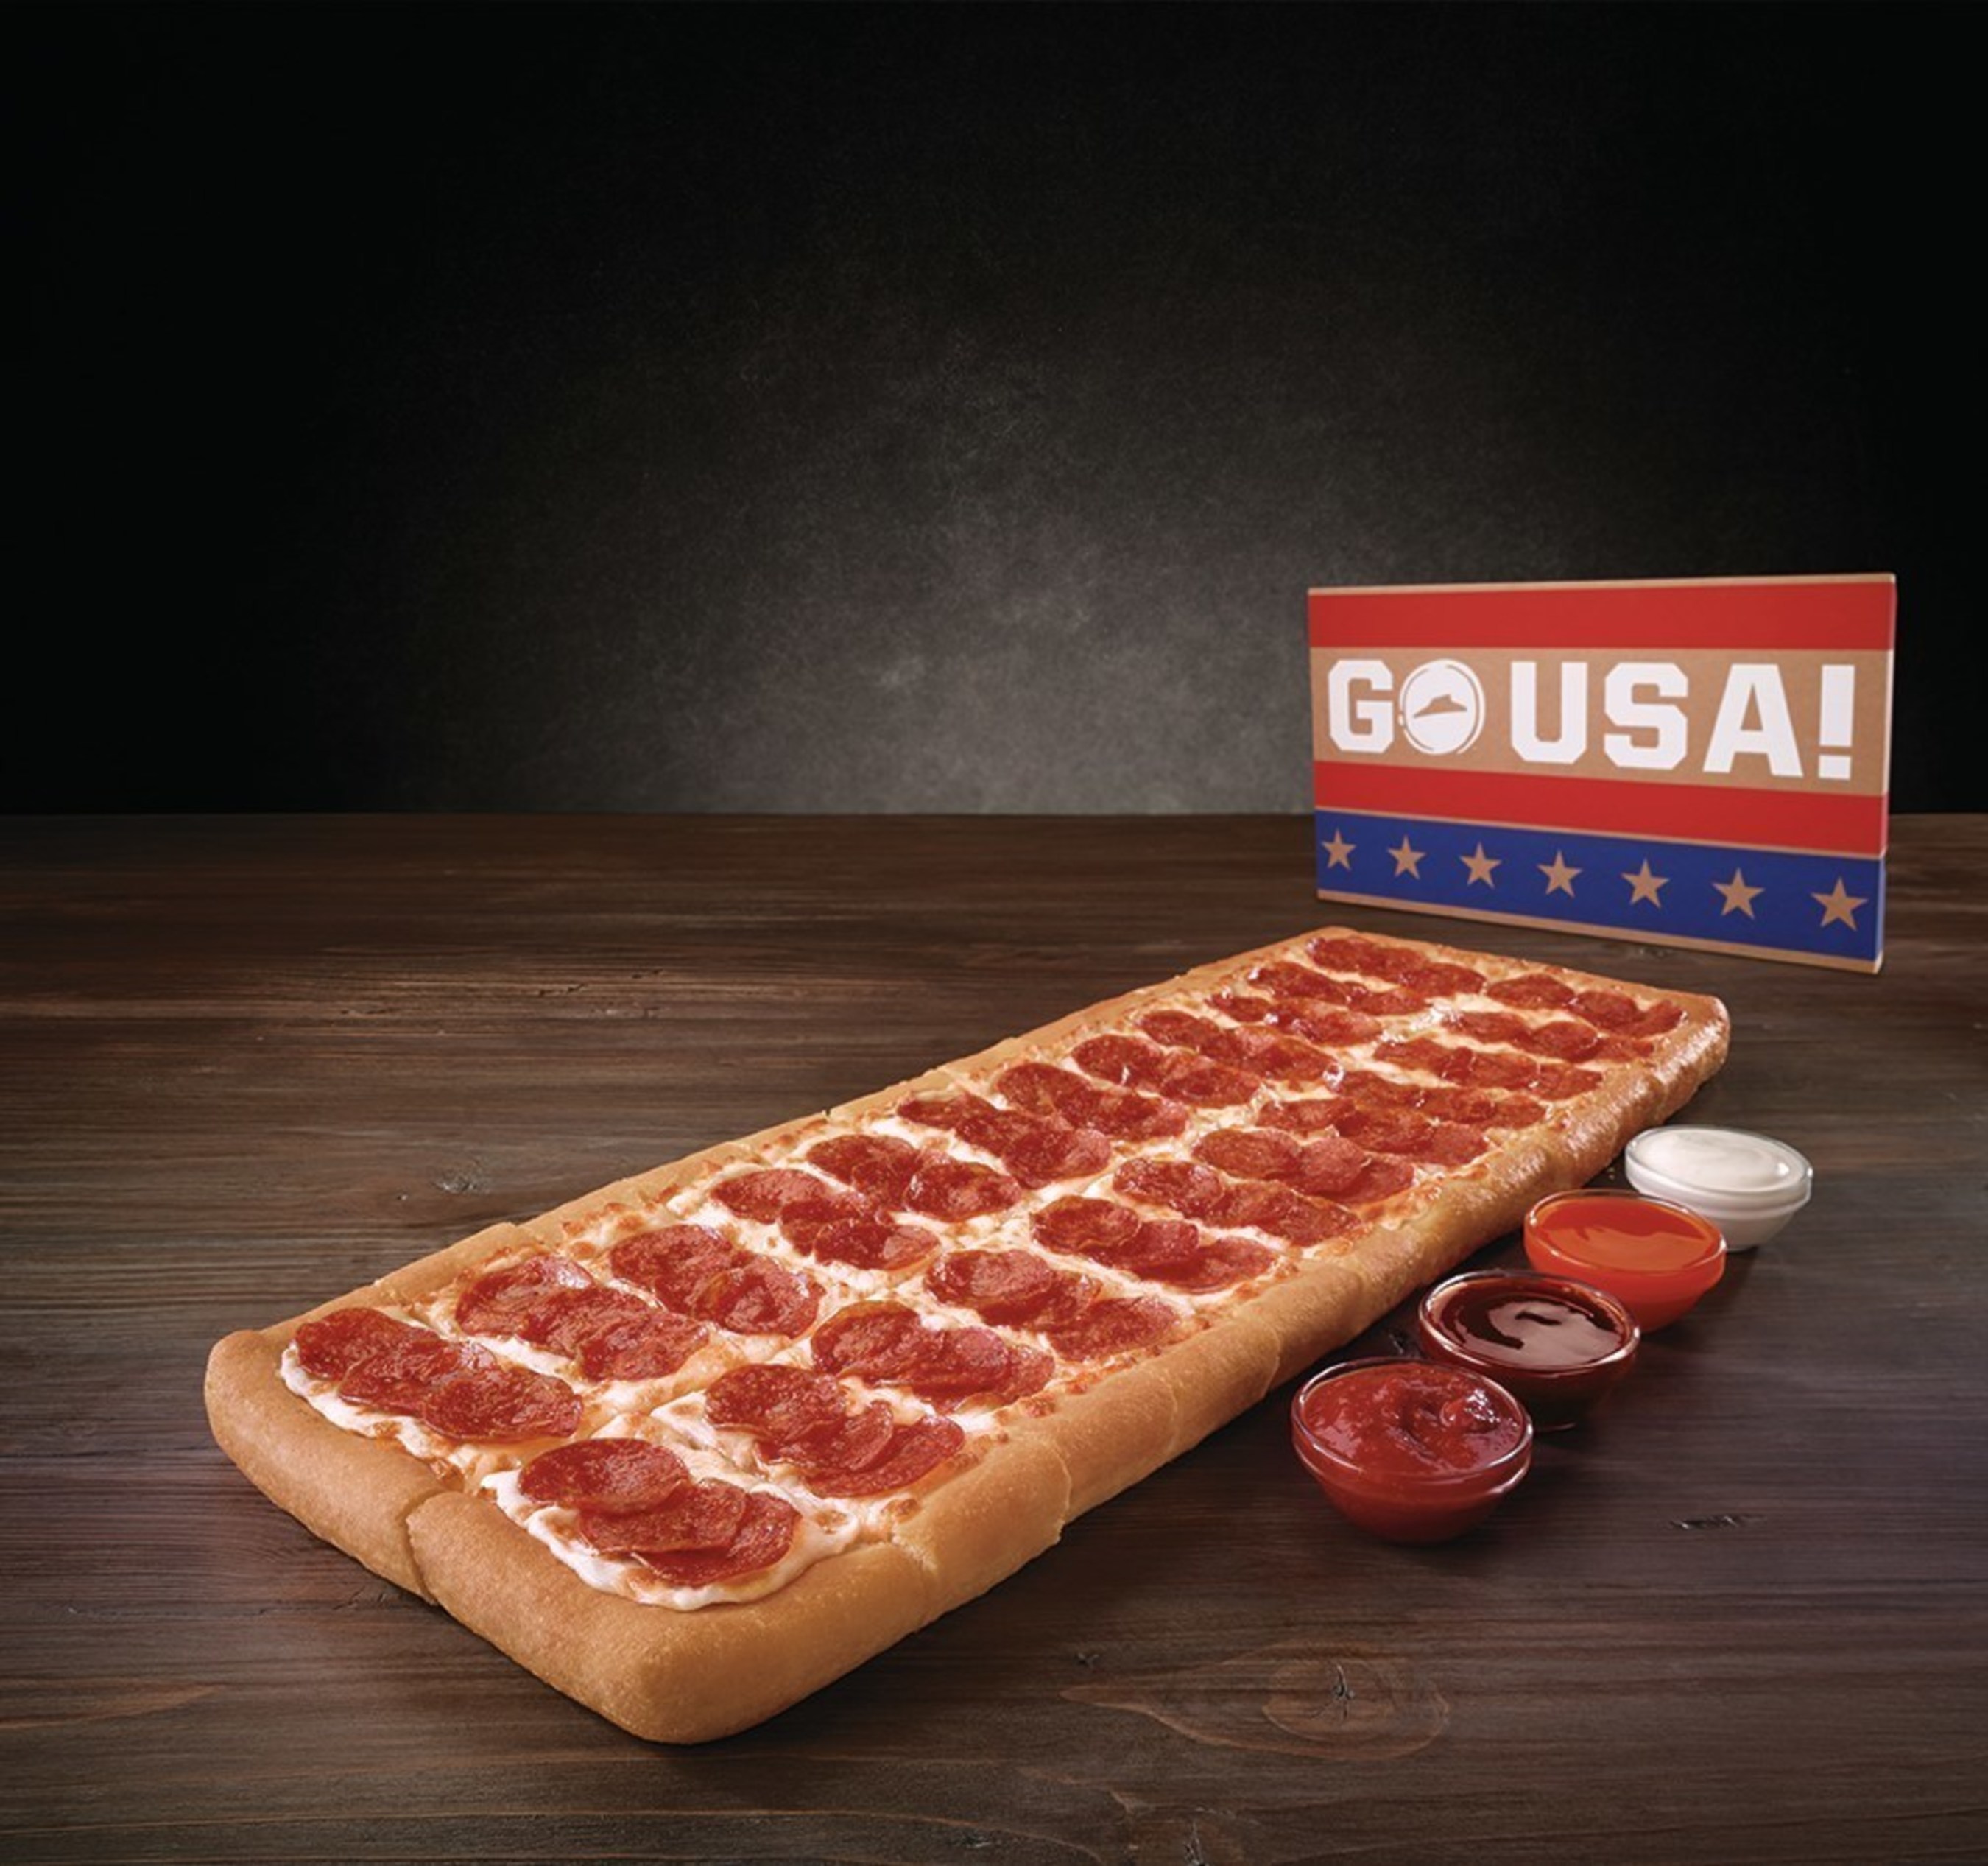 Pizza Hut will please crowds this summer with the Big Flavor Dipper Pizza, a pizza that is nearly two-feet long and features U.S.-inspired sauces - all served in a patriotic box - for only $12.99.